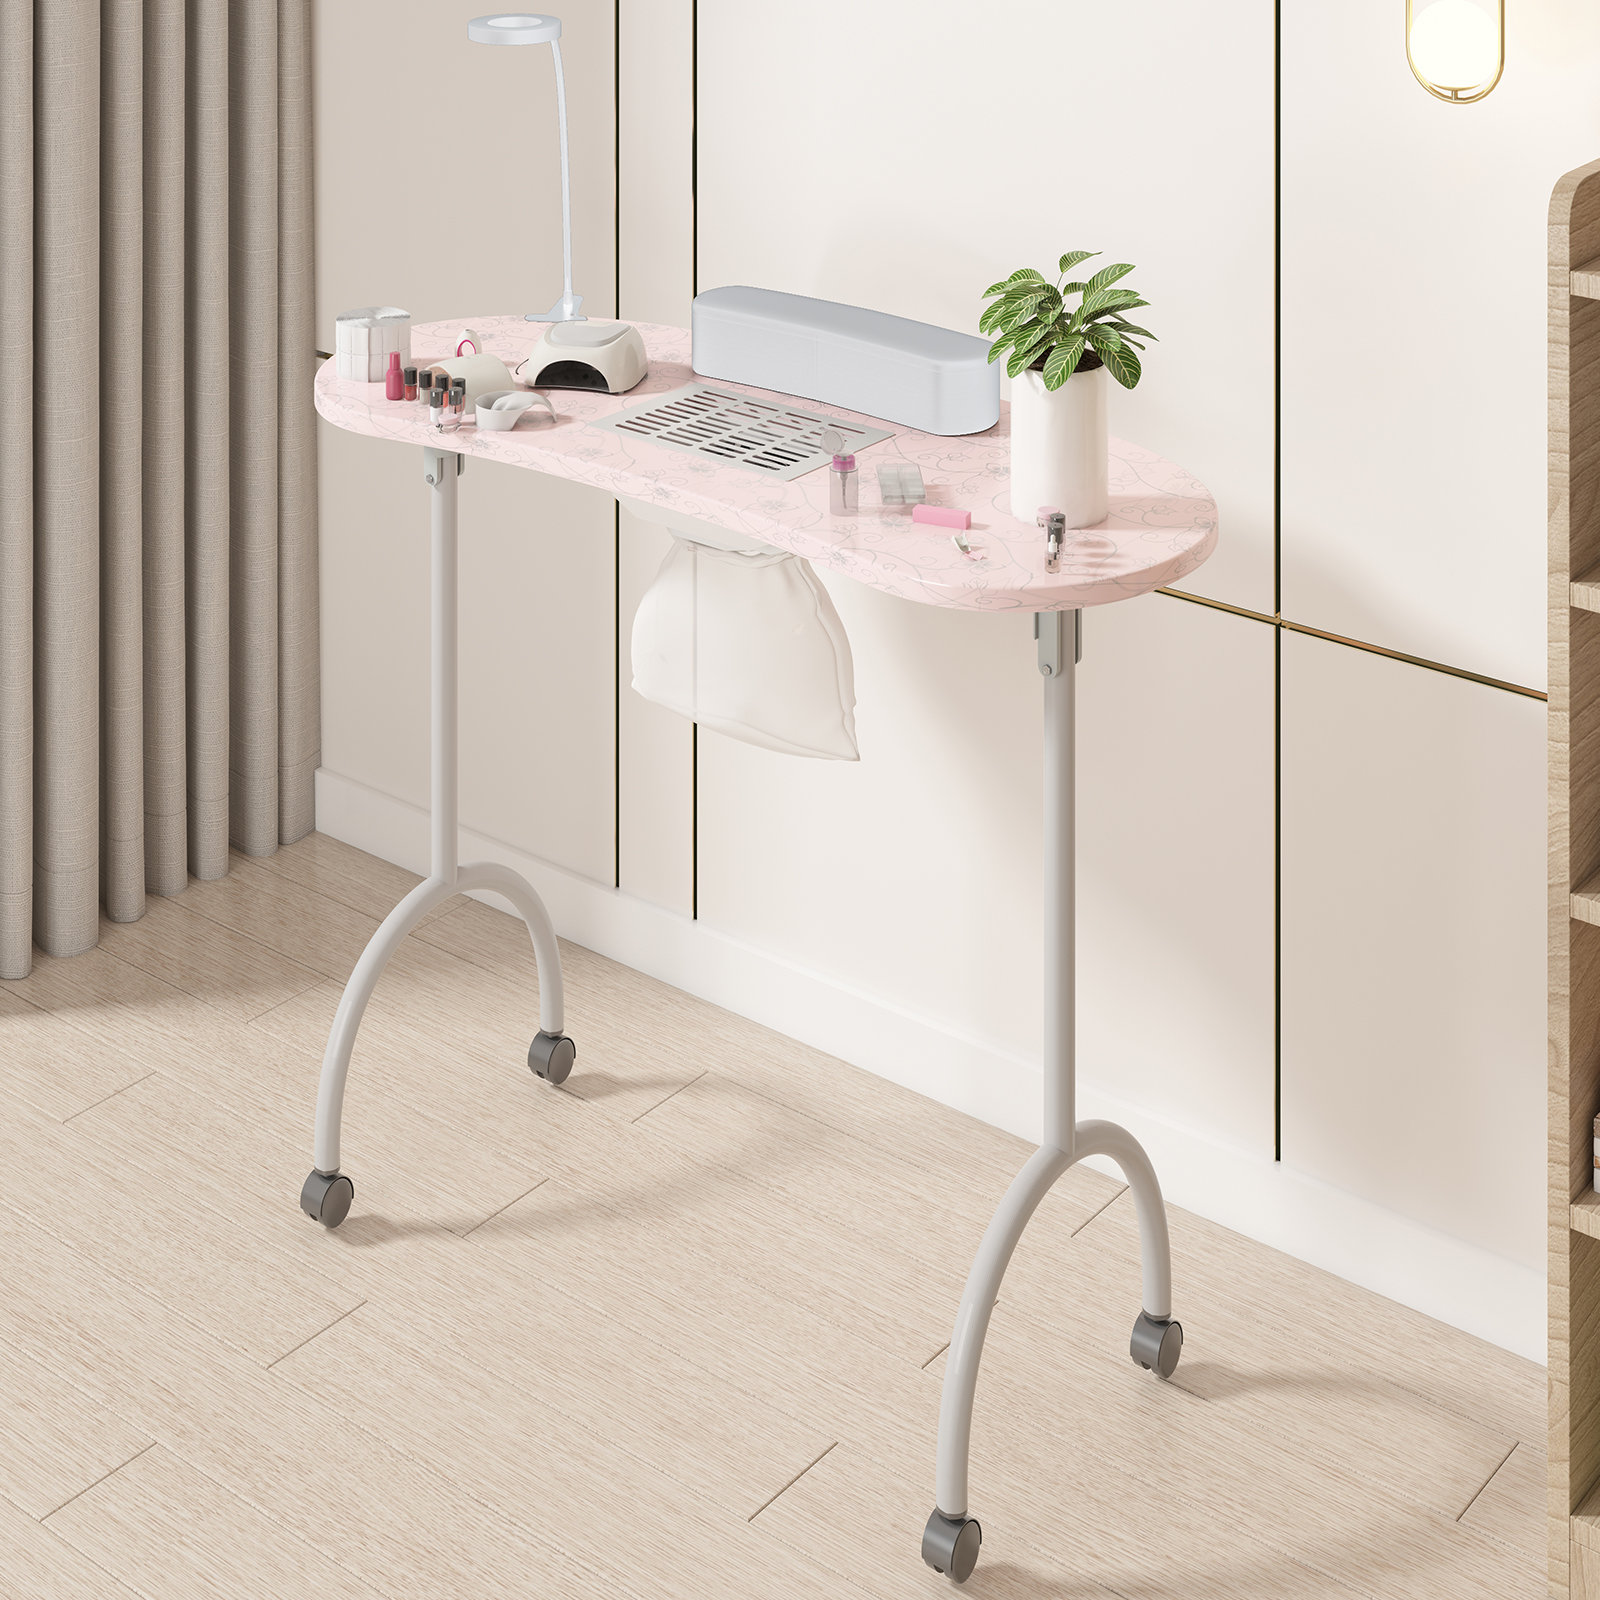 WATERJOY Manicure Nail Table Steel Frame Nail Station Table India | Ubuy